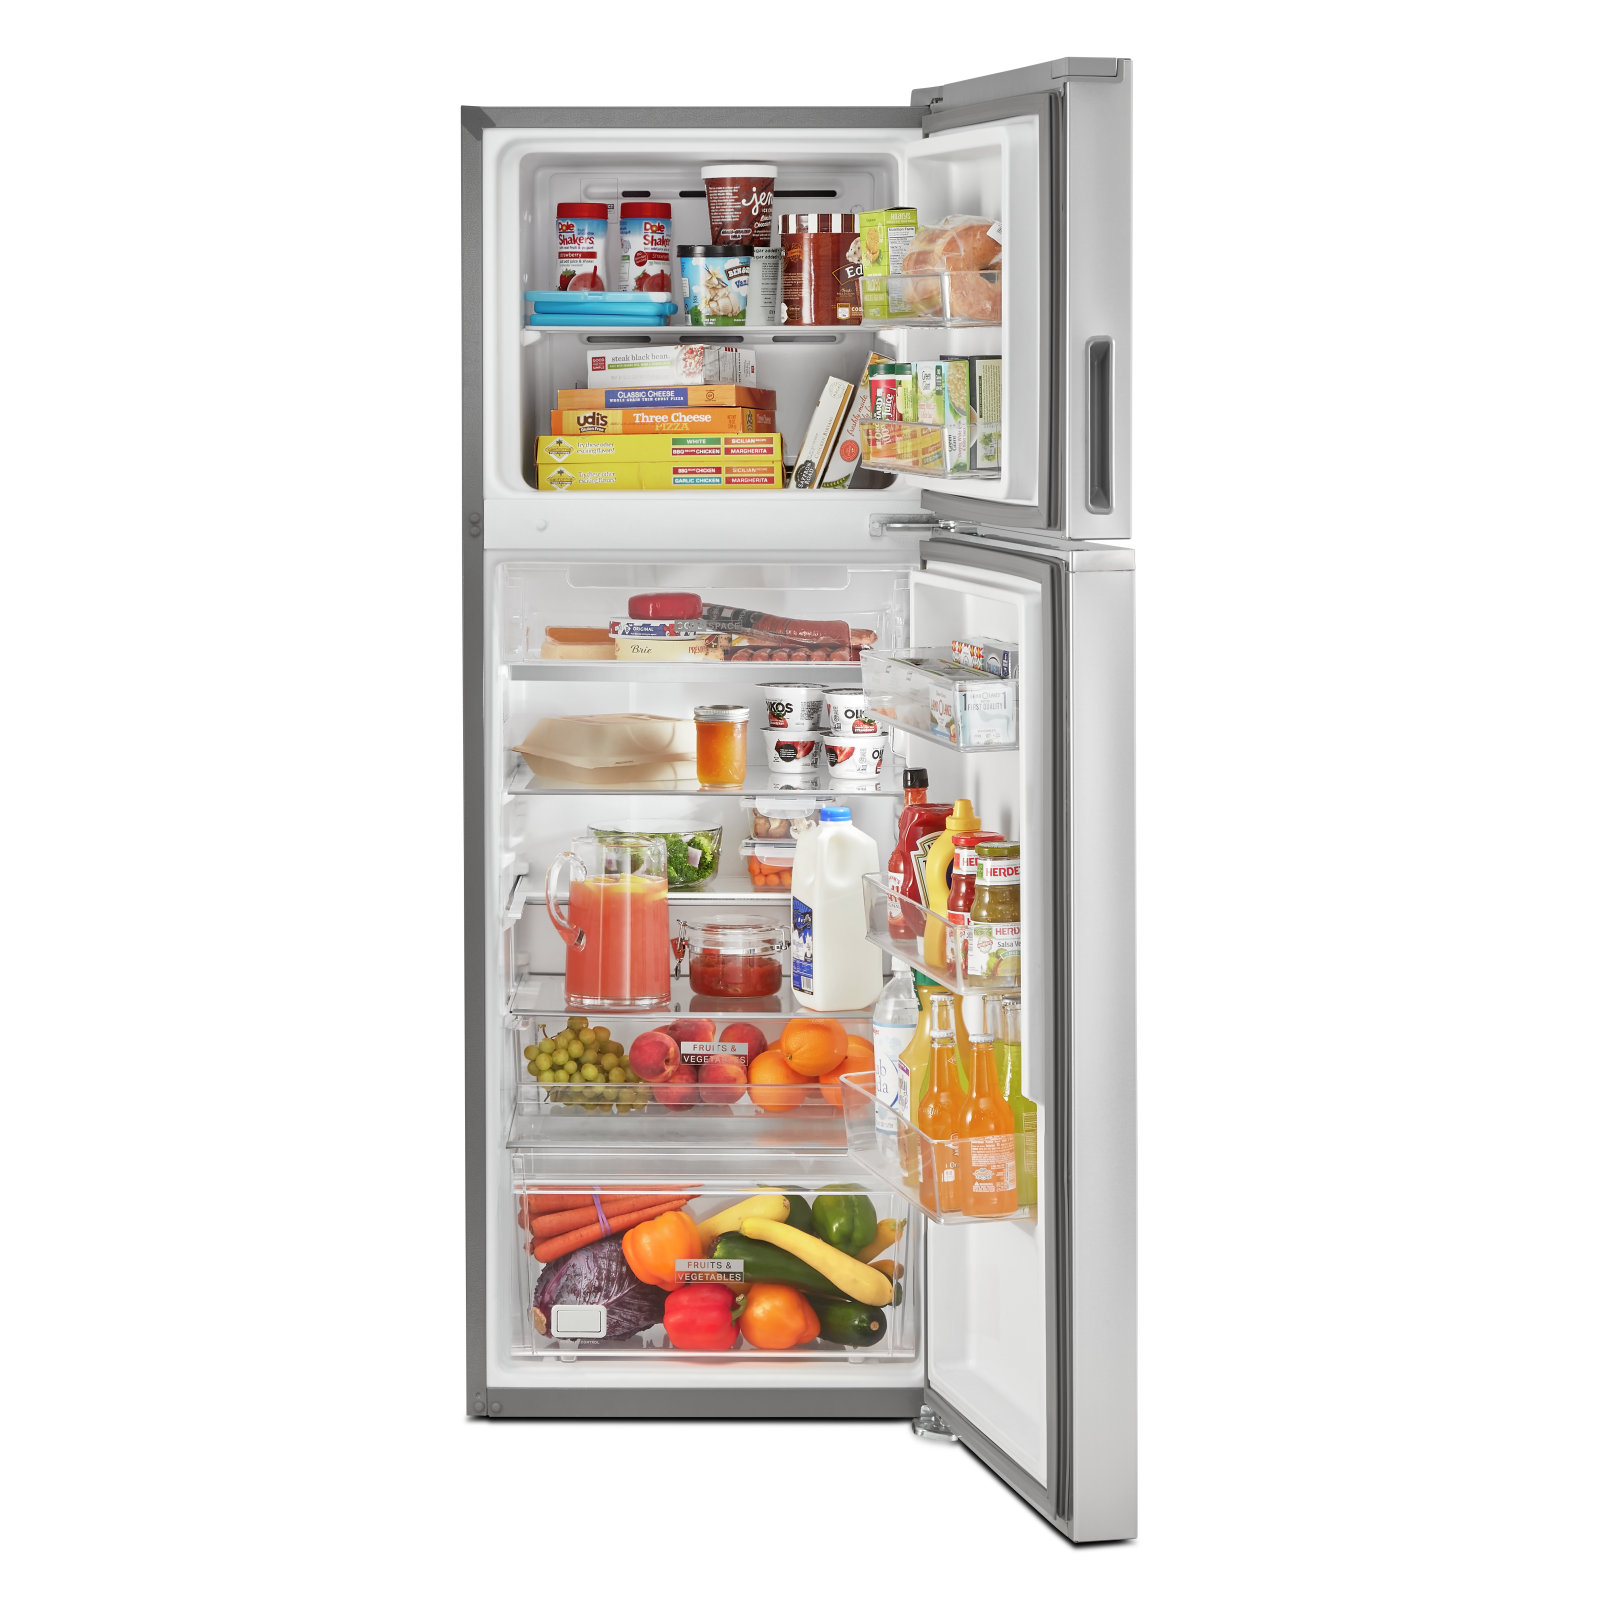 Whirlpool - 24.375 Inch 12.9 cu. ft Top Mount Refrigerator in Stainless - WRT313CZLZ